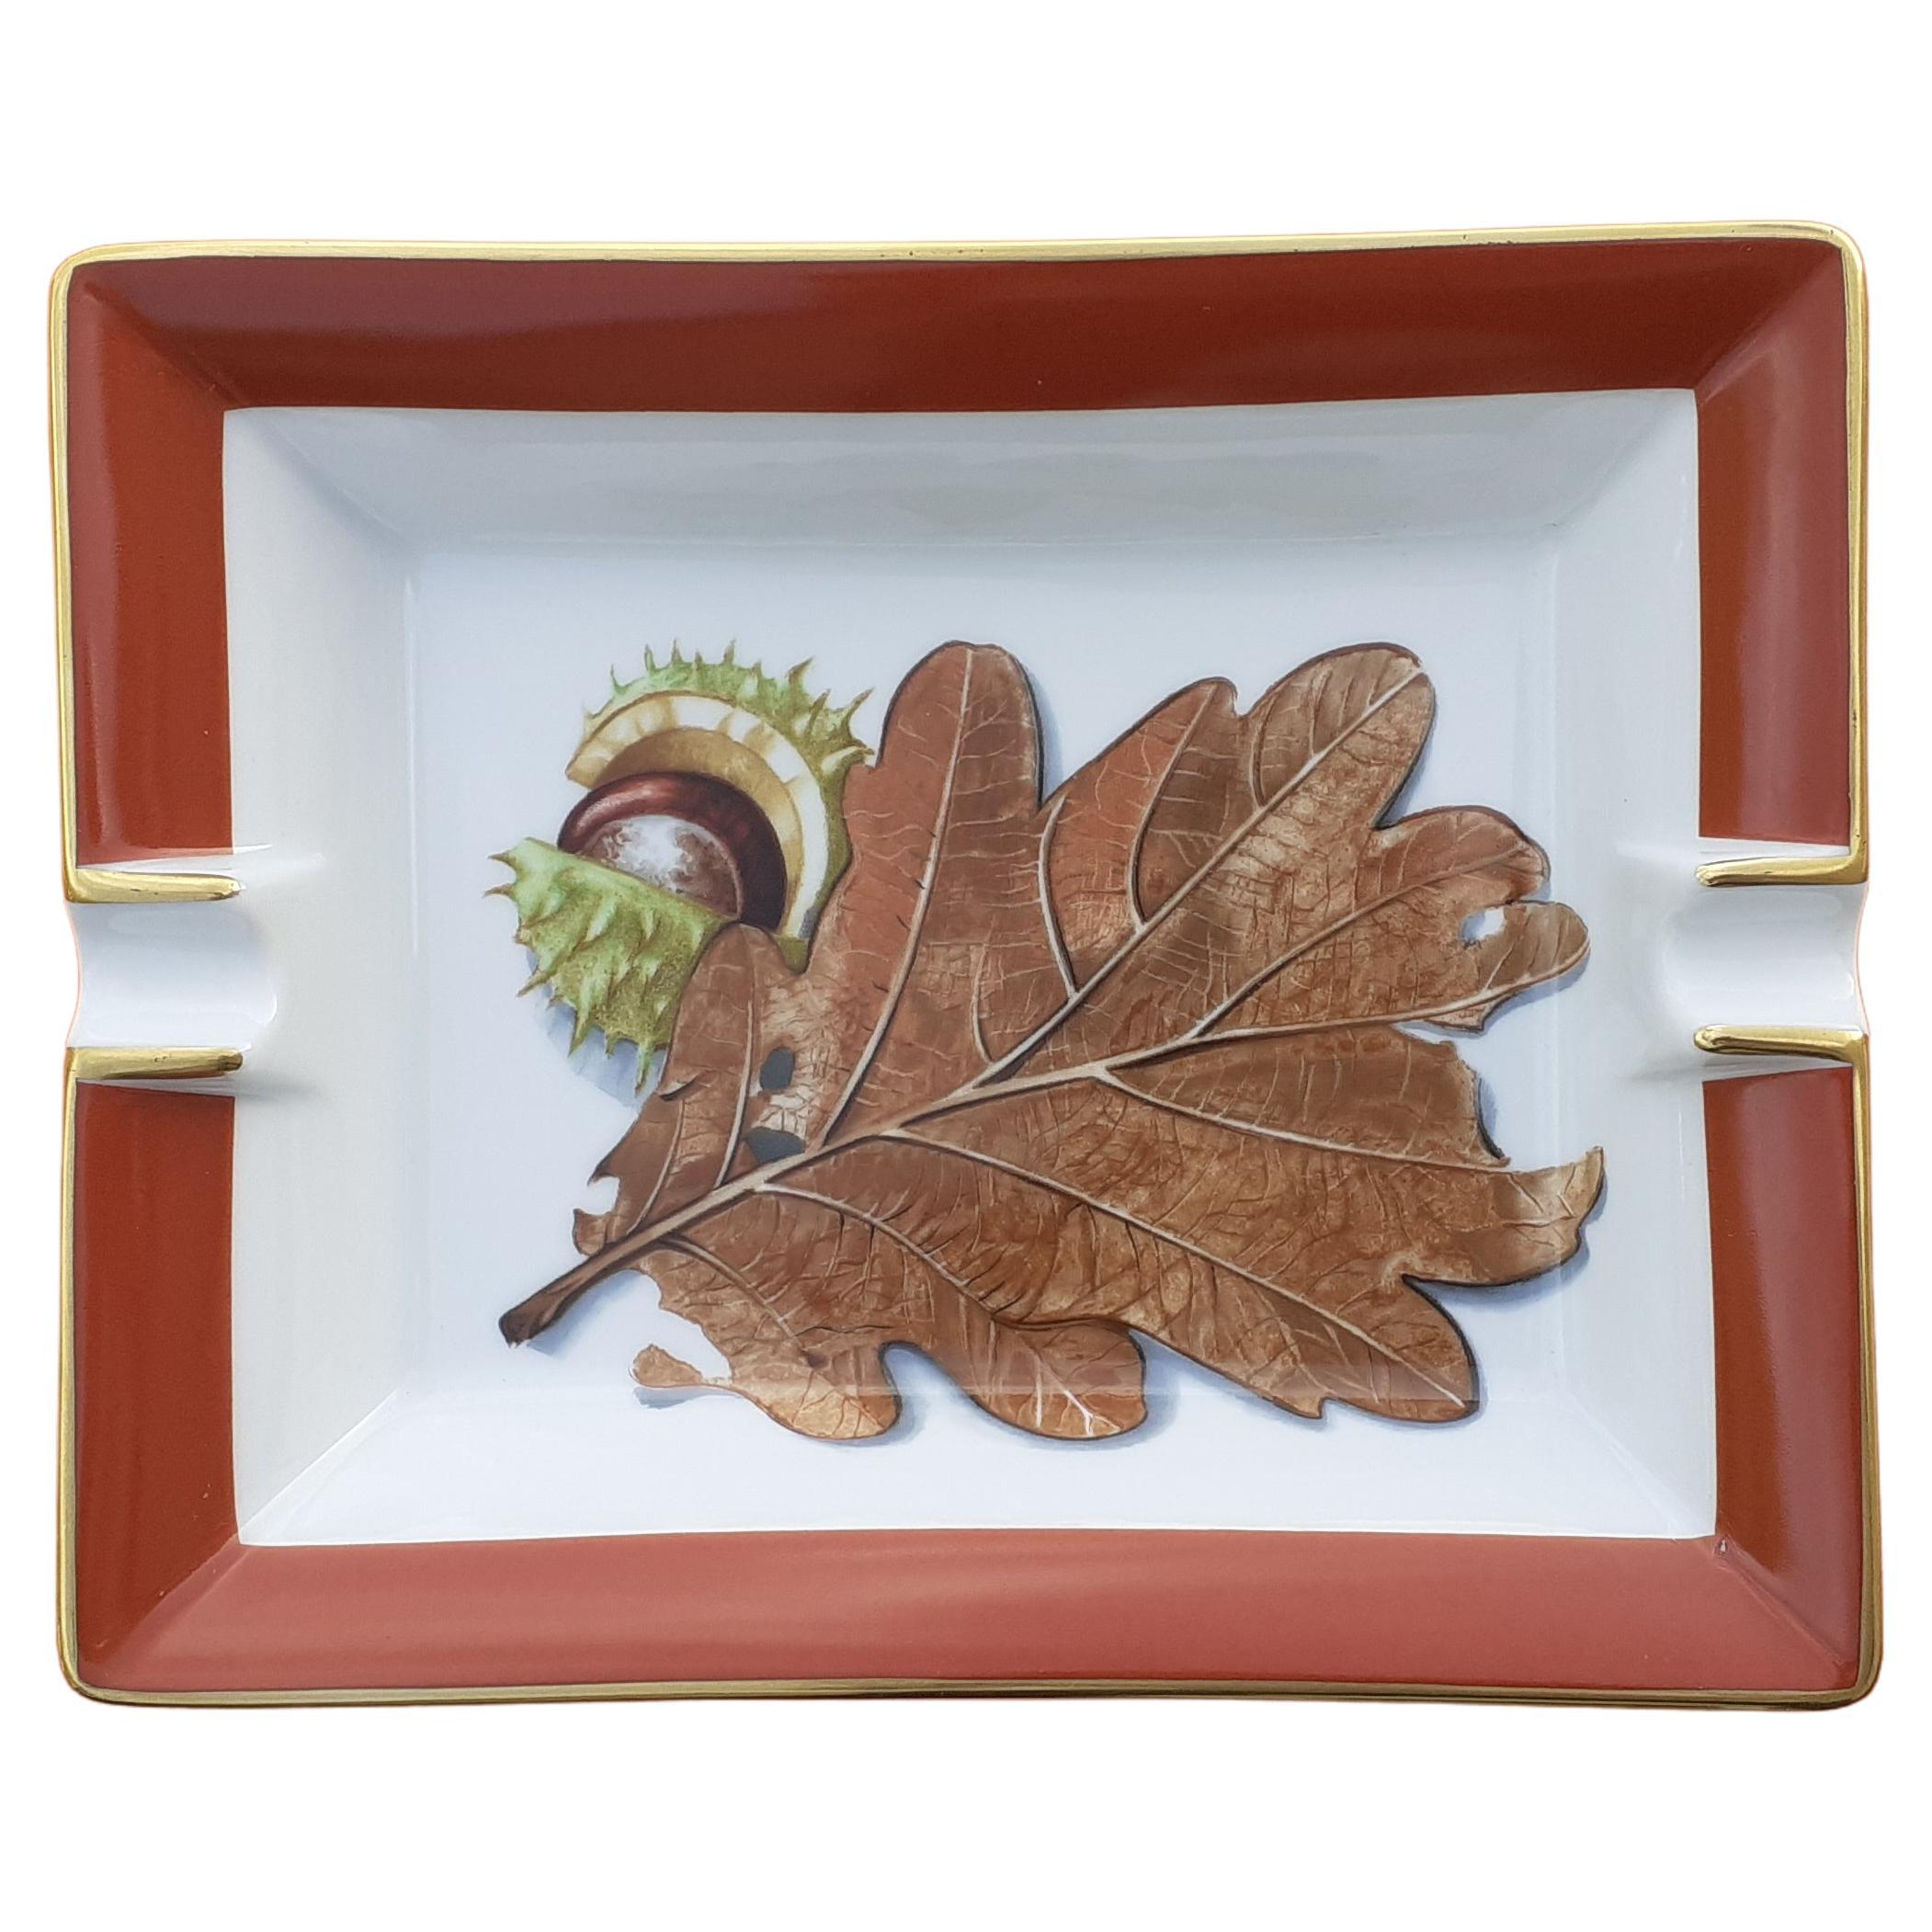 Gorgeous and Rare Authentic Hermès Ashtray

Print: Chestnut and Oak Leaf

Theme: Fall 

Made in France

Made of printed porcelain

Colorways: White, Brown, Green, Golden

